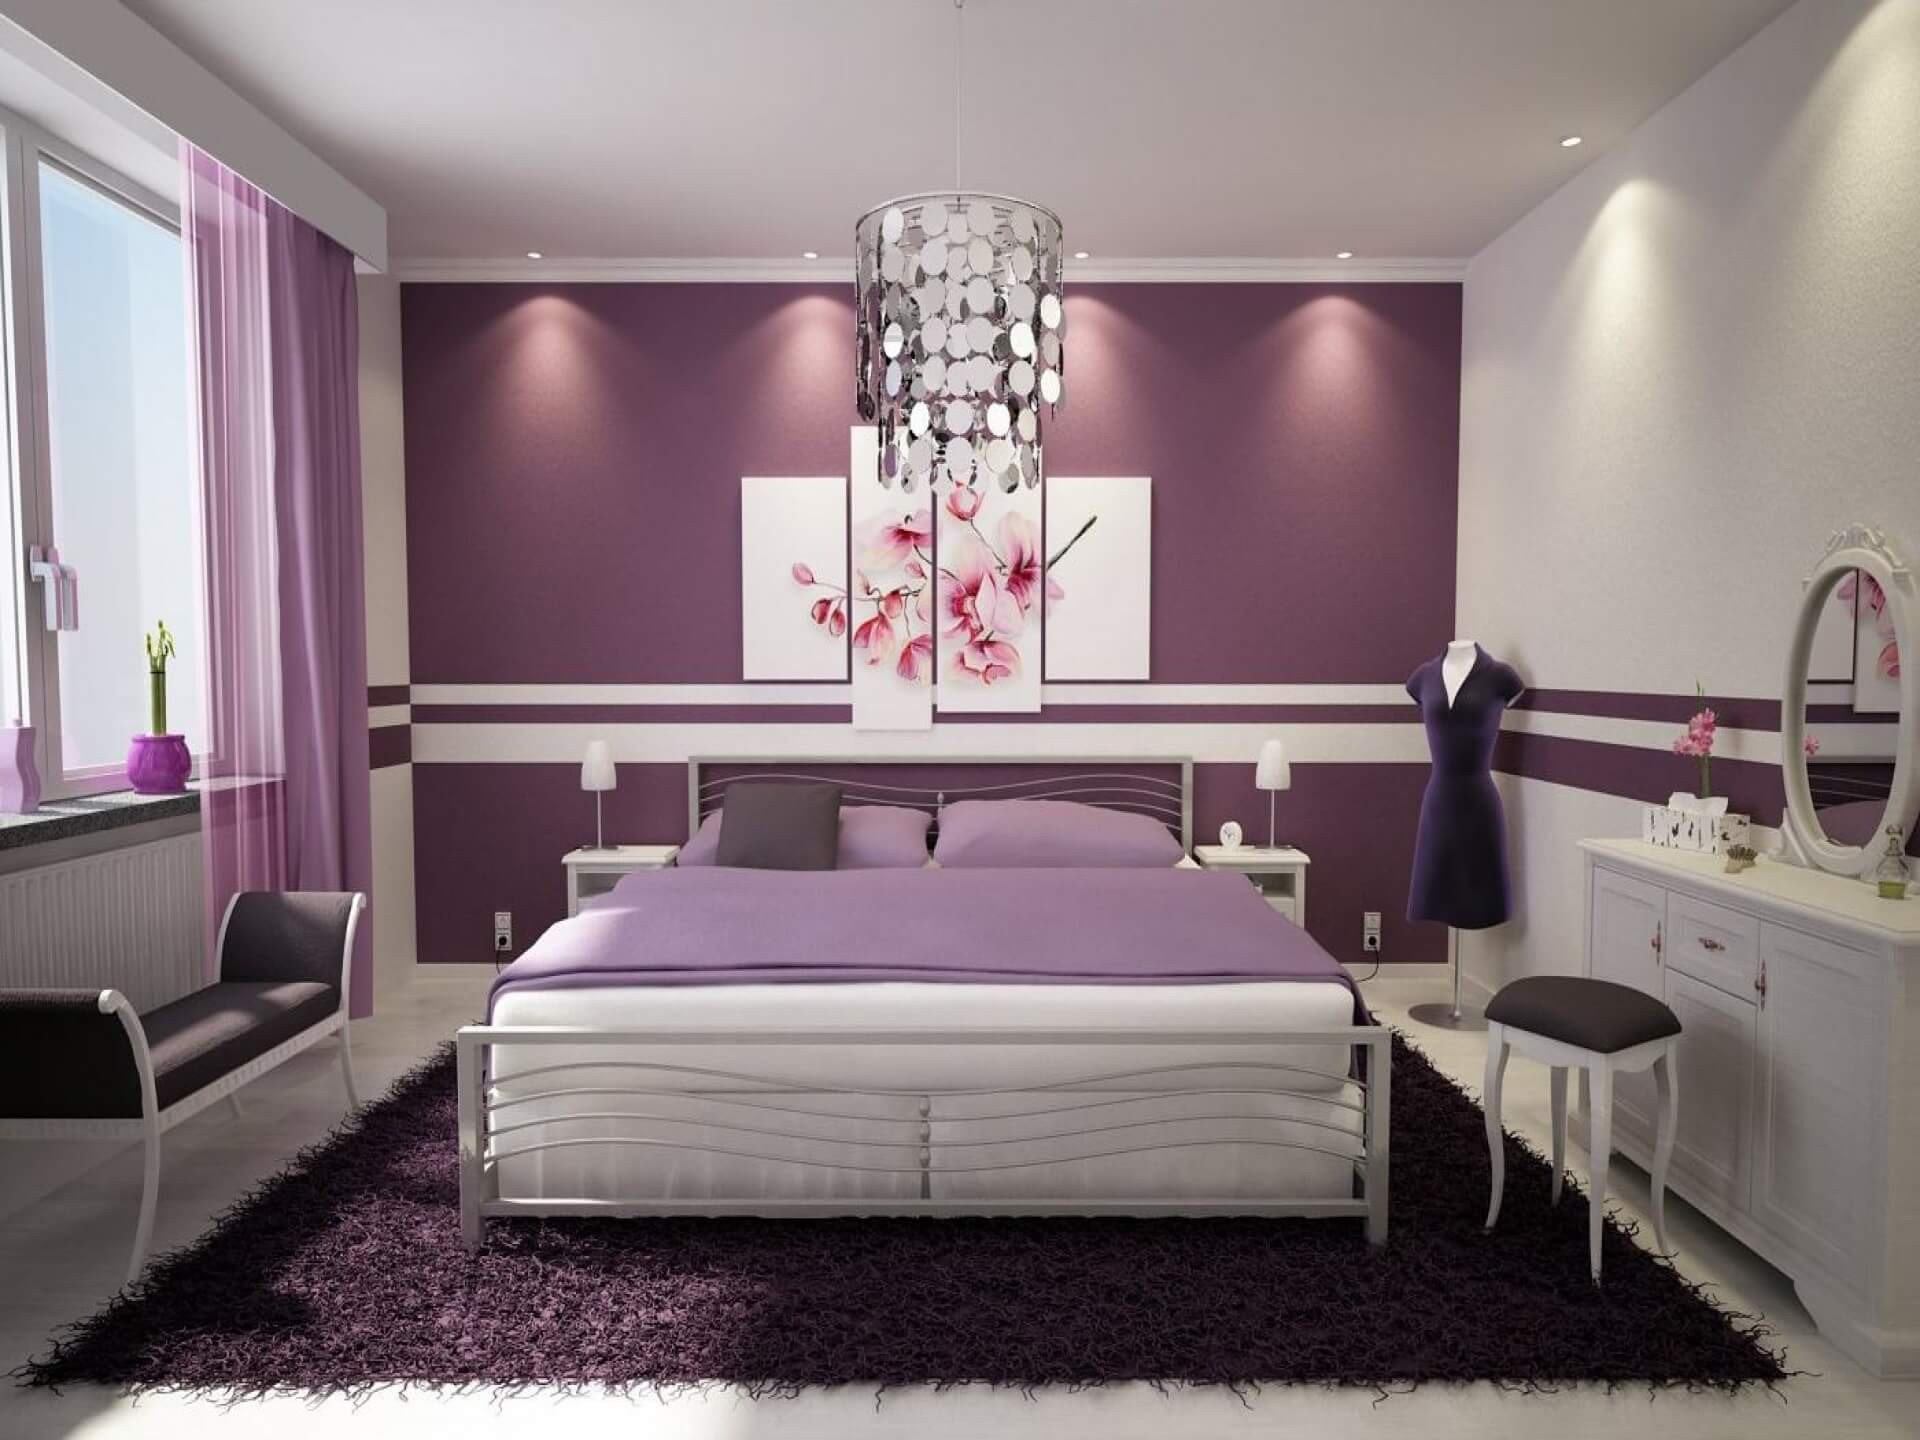 Paint Ideas For Small Bedroom
 Top 10 Girls Bedroom Paint Ideas 2017 TheyDesign